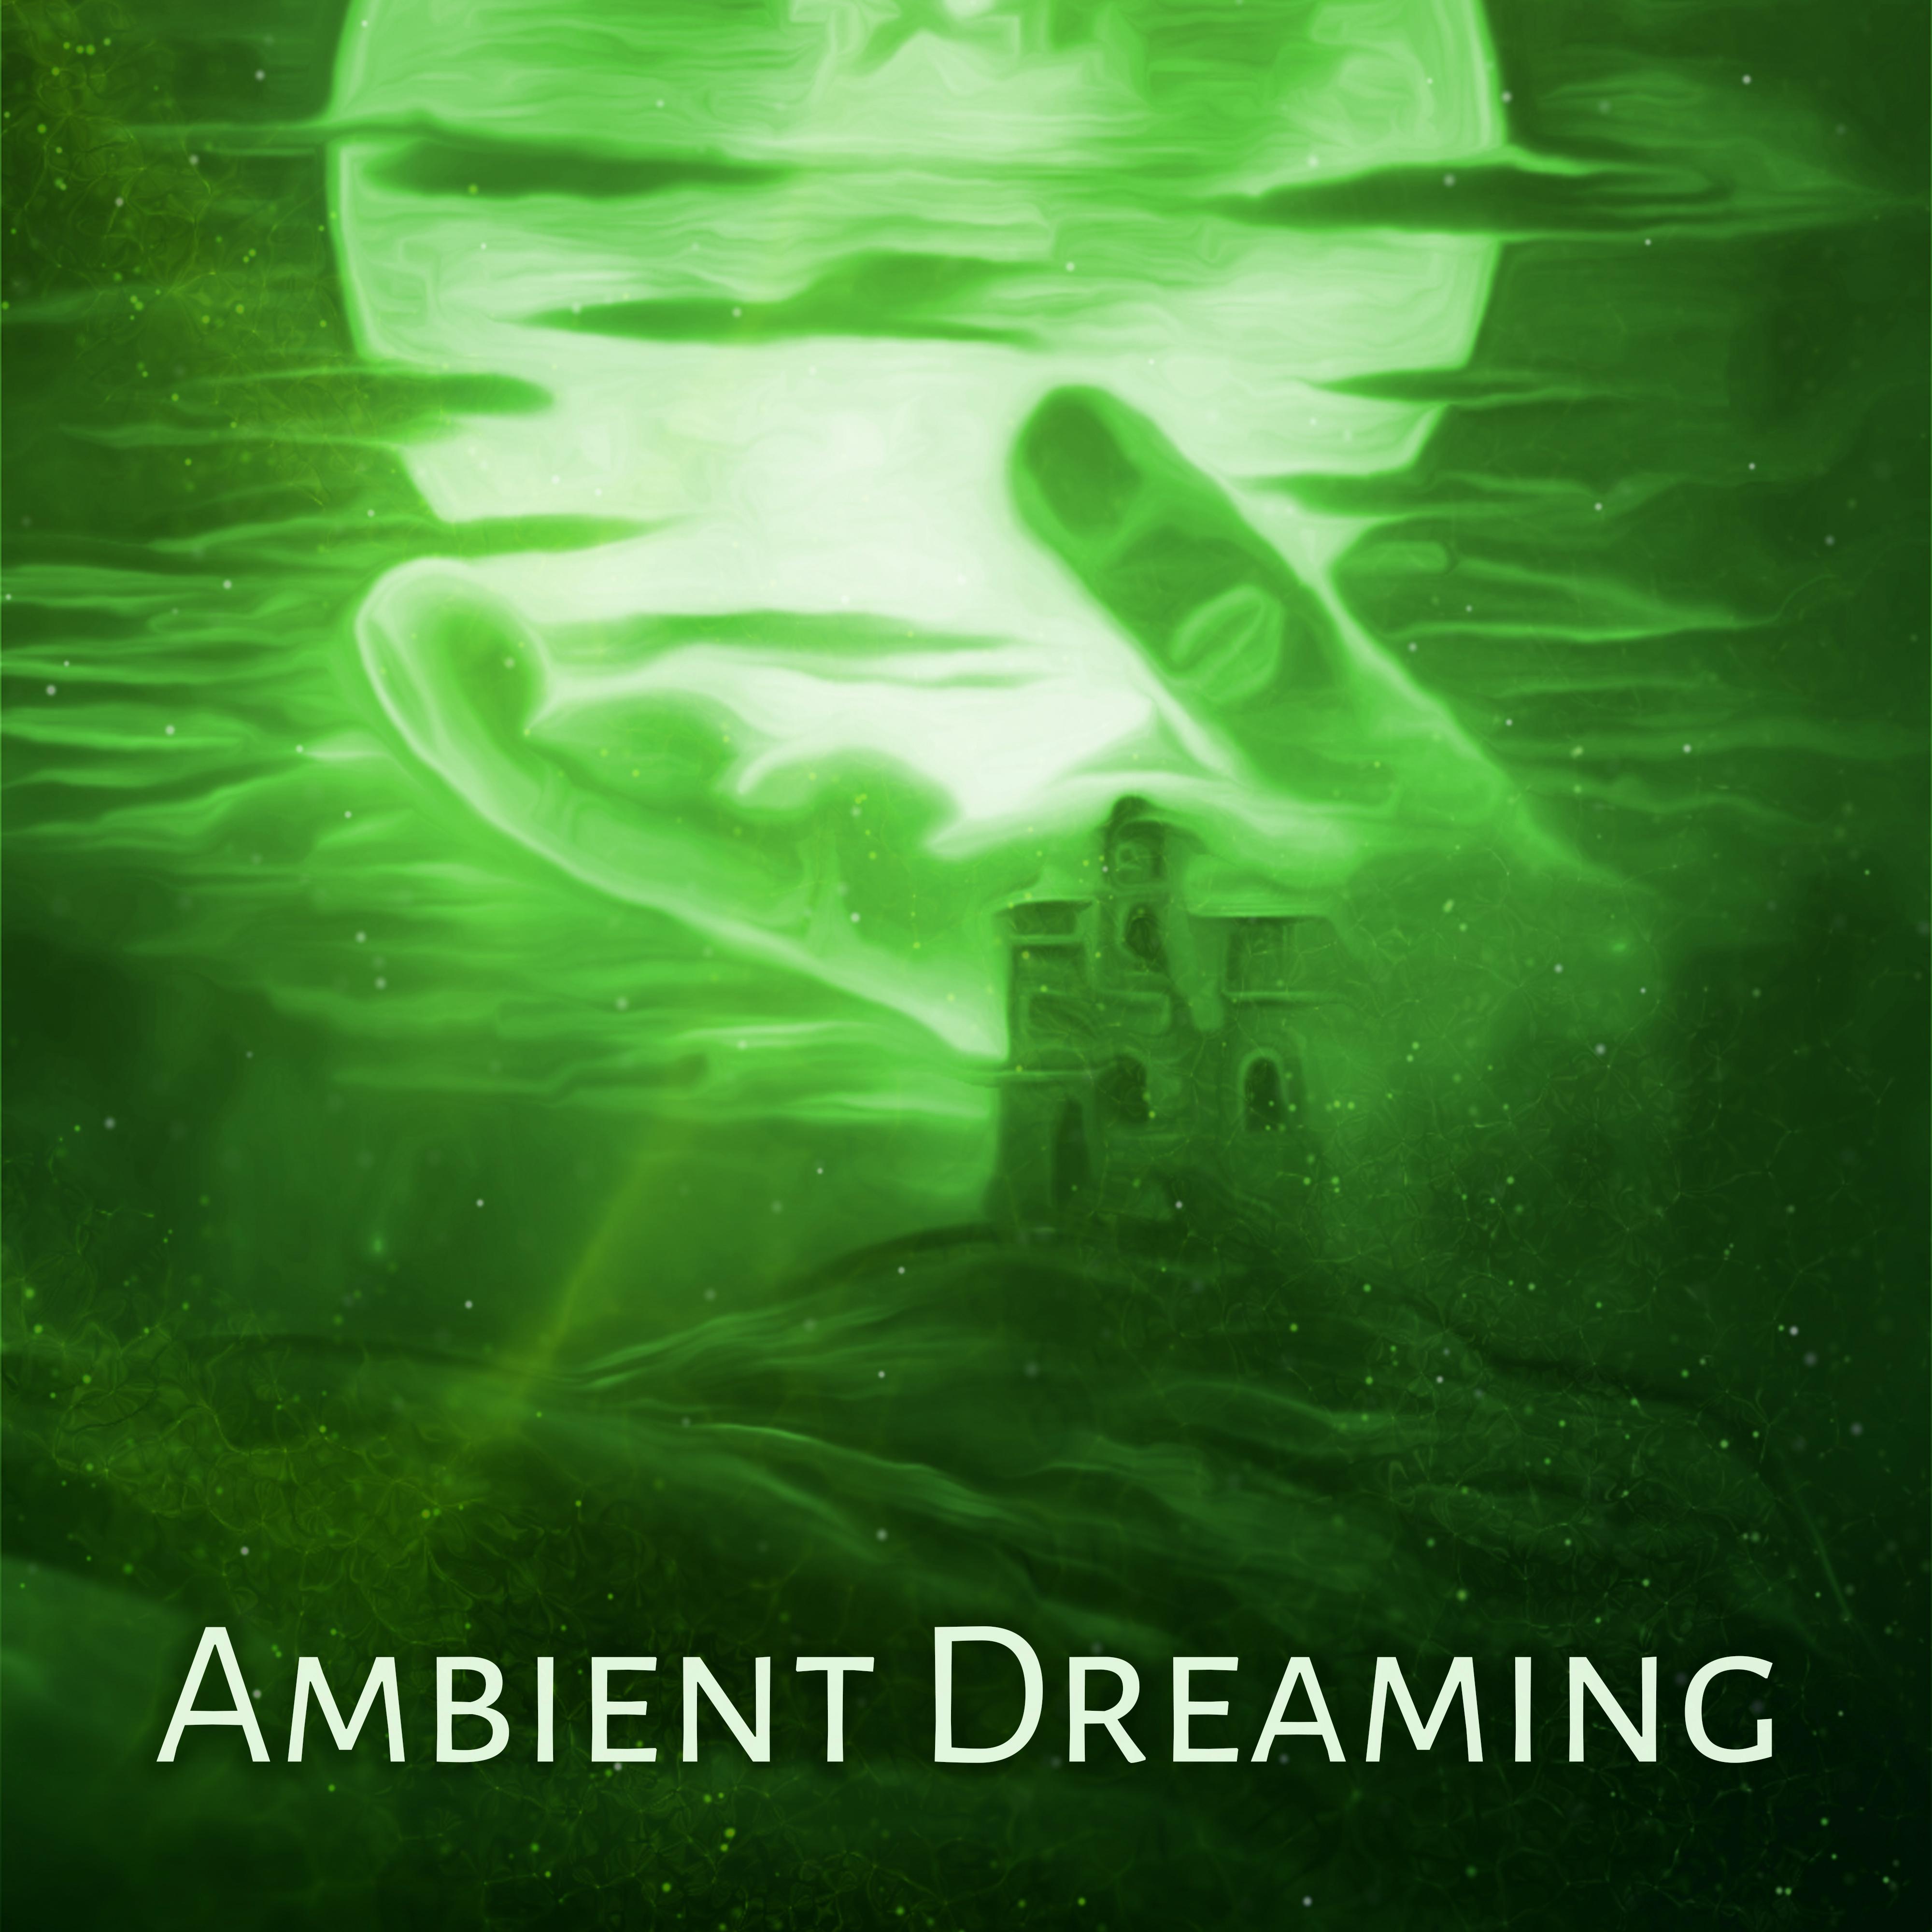 Ambient Dreaming – Soft Music to Sleep, New Age Dreaming Sounds, Fall Asleep with Soothing Vibes